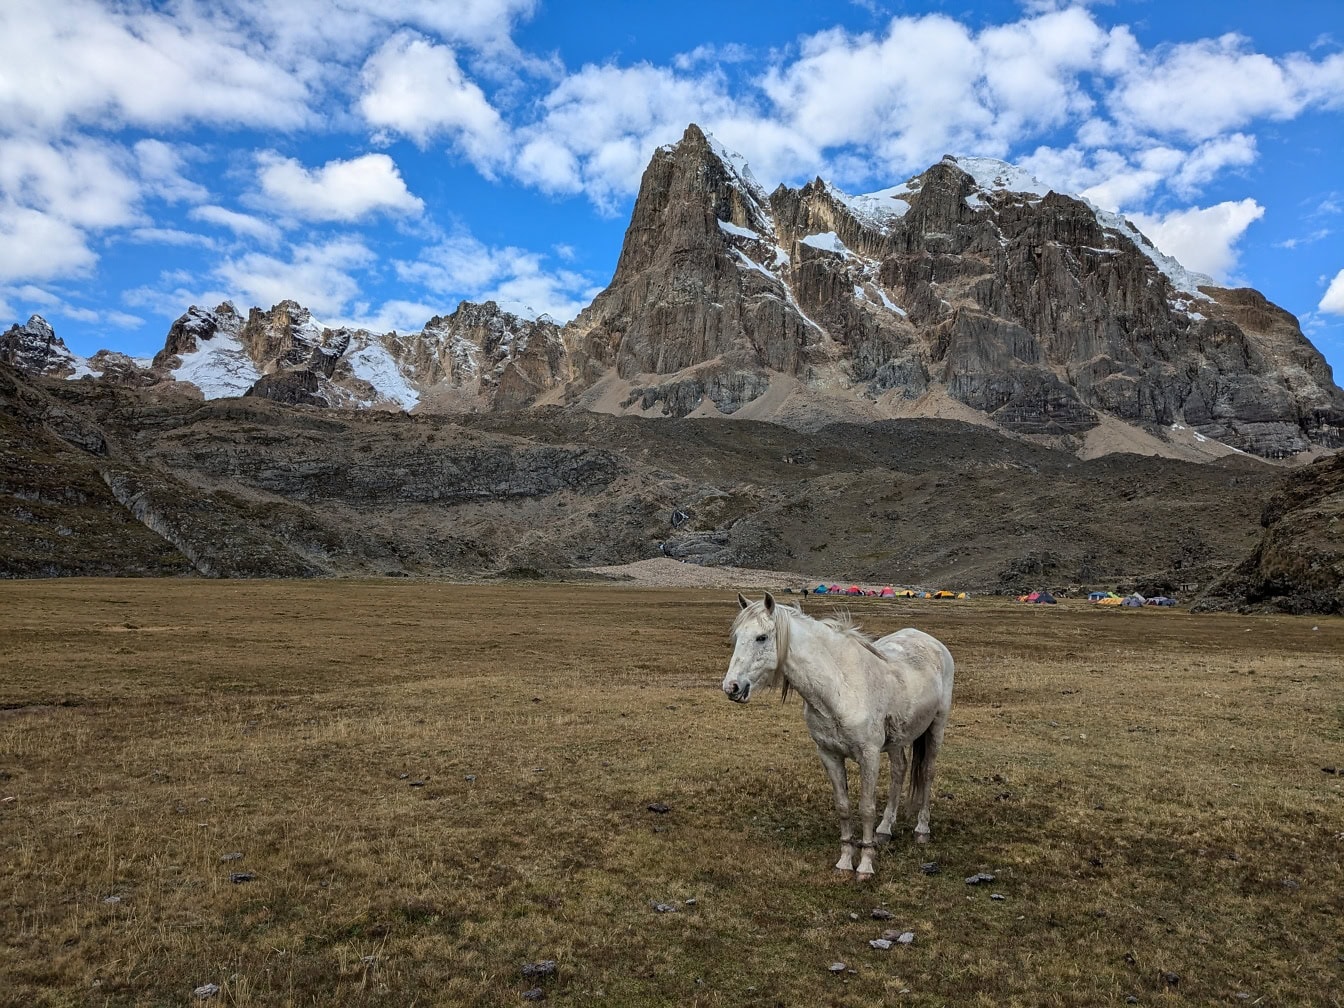 White horse standing in a field with mountains in the background at Cordillera Huayhuash mountain range in the Andes of Peru